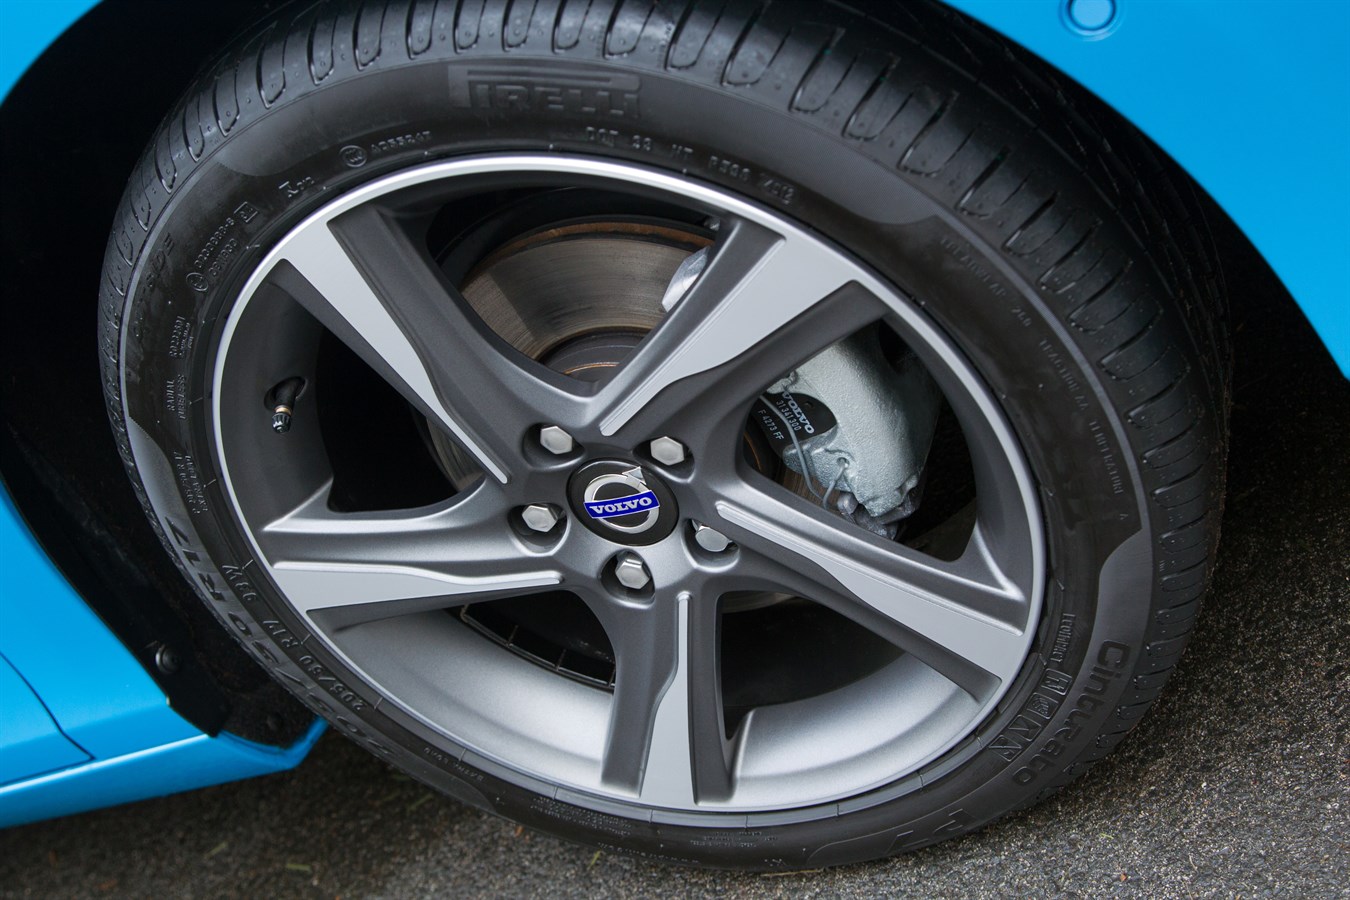 Ixion alloy wheel, as fitted to the all-new Volvo V40 R-Design